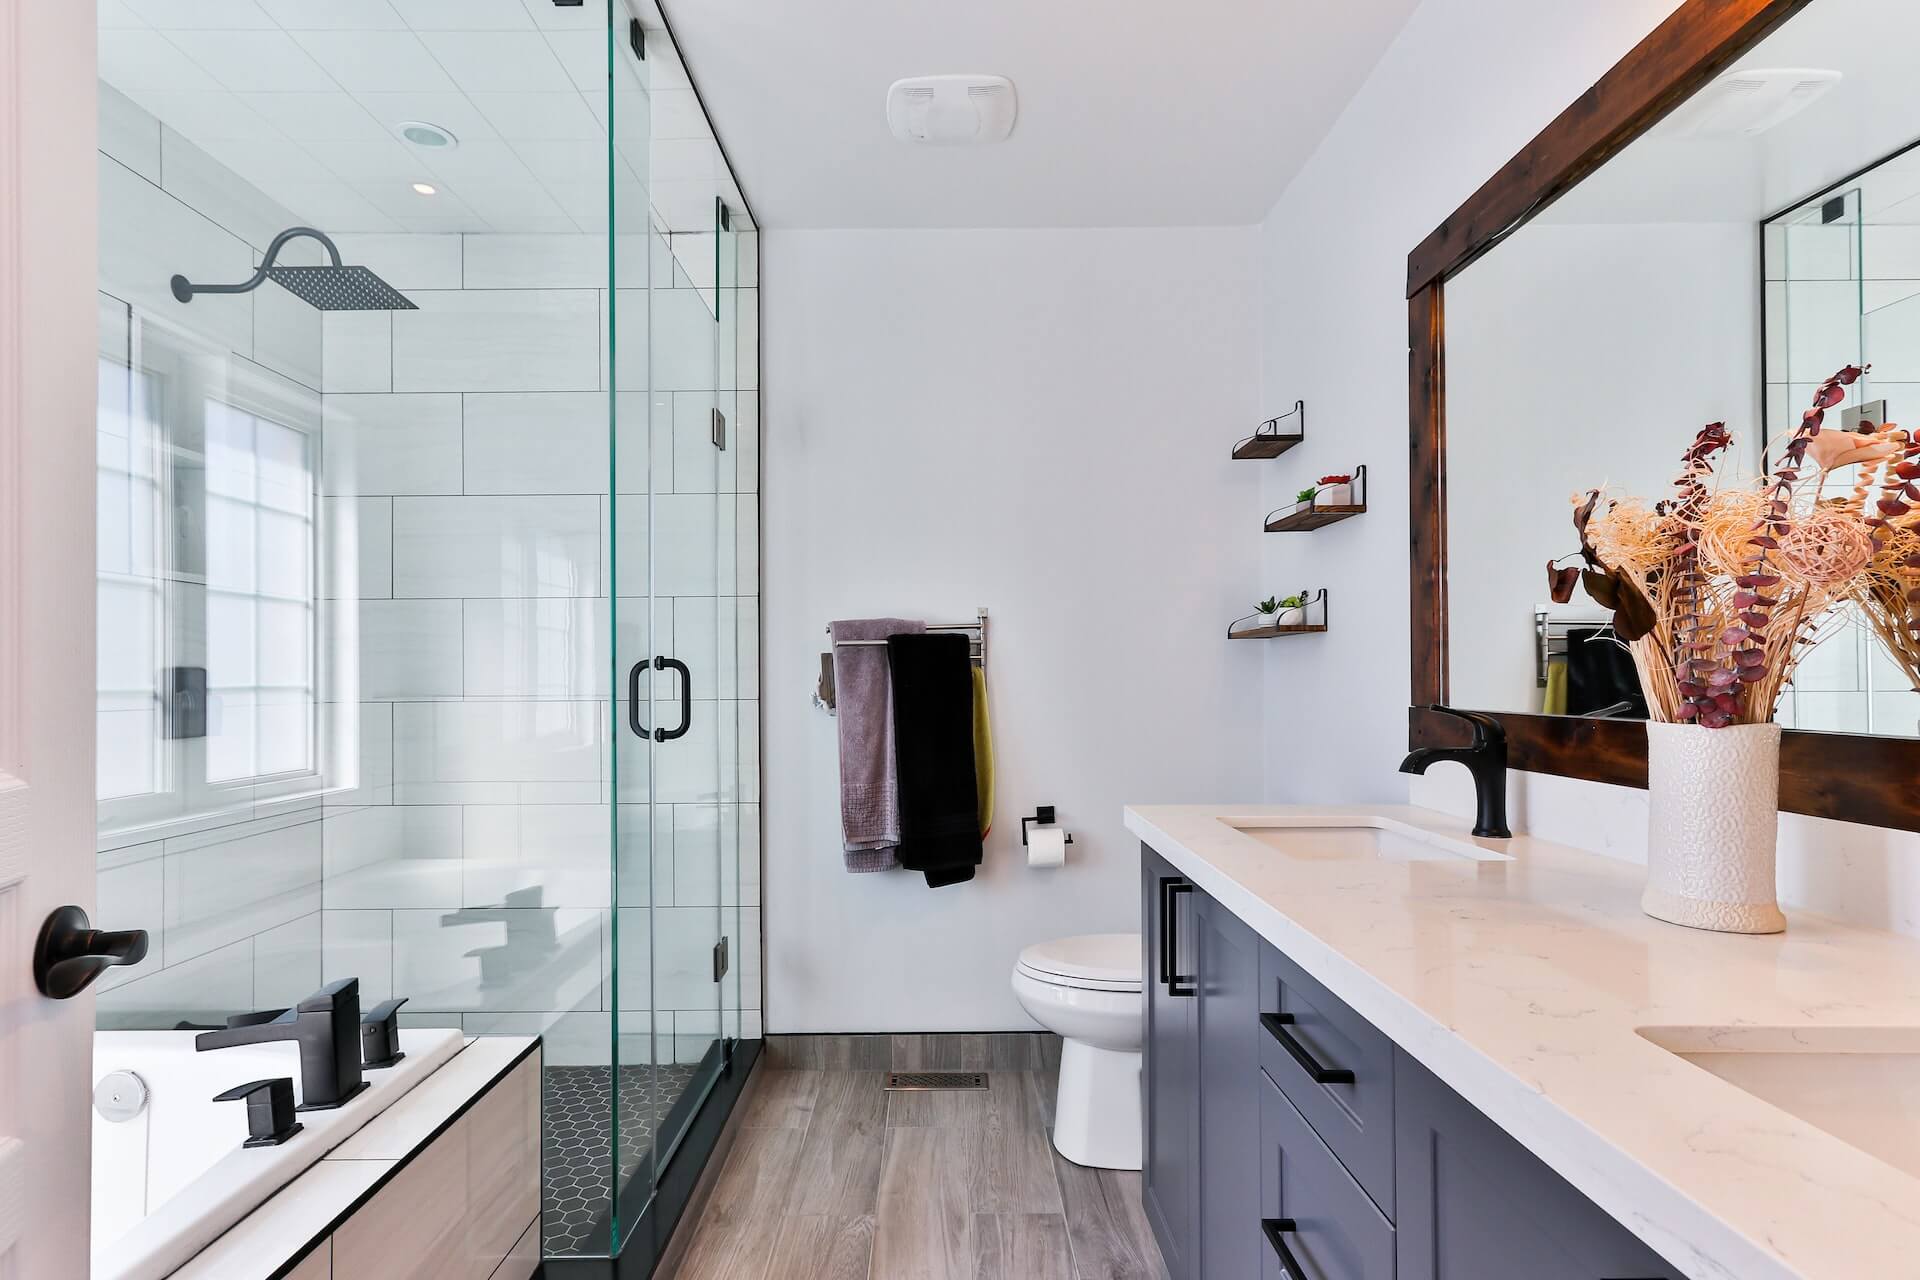 What Is the Ideal Frequency of Cleaning Your Bathroom